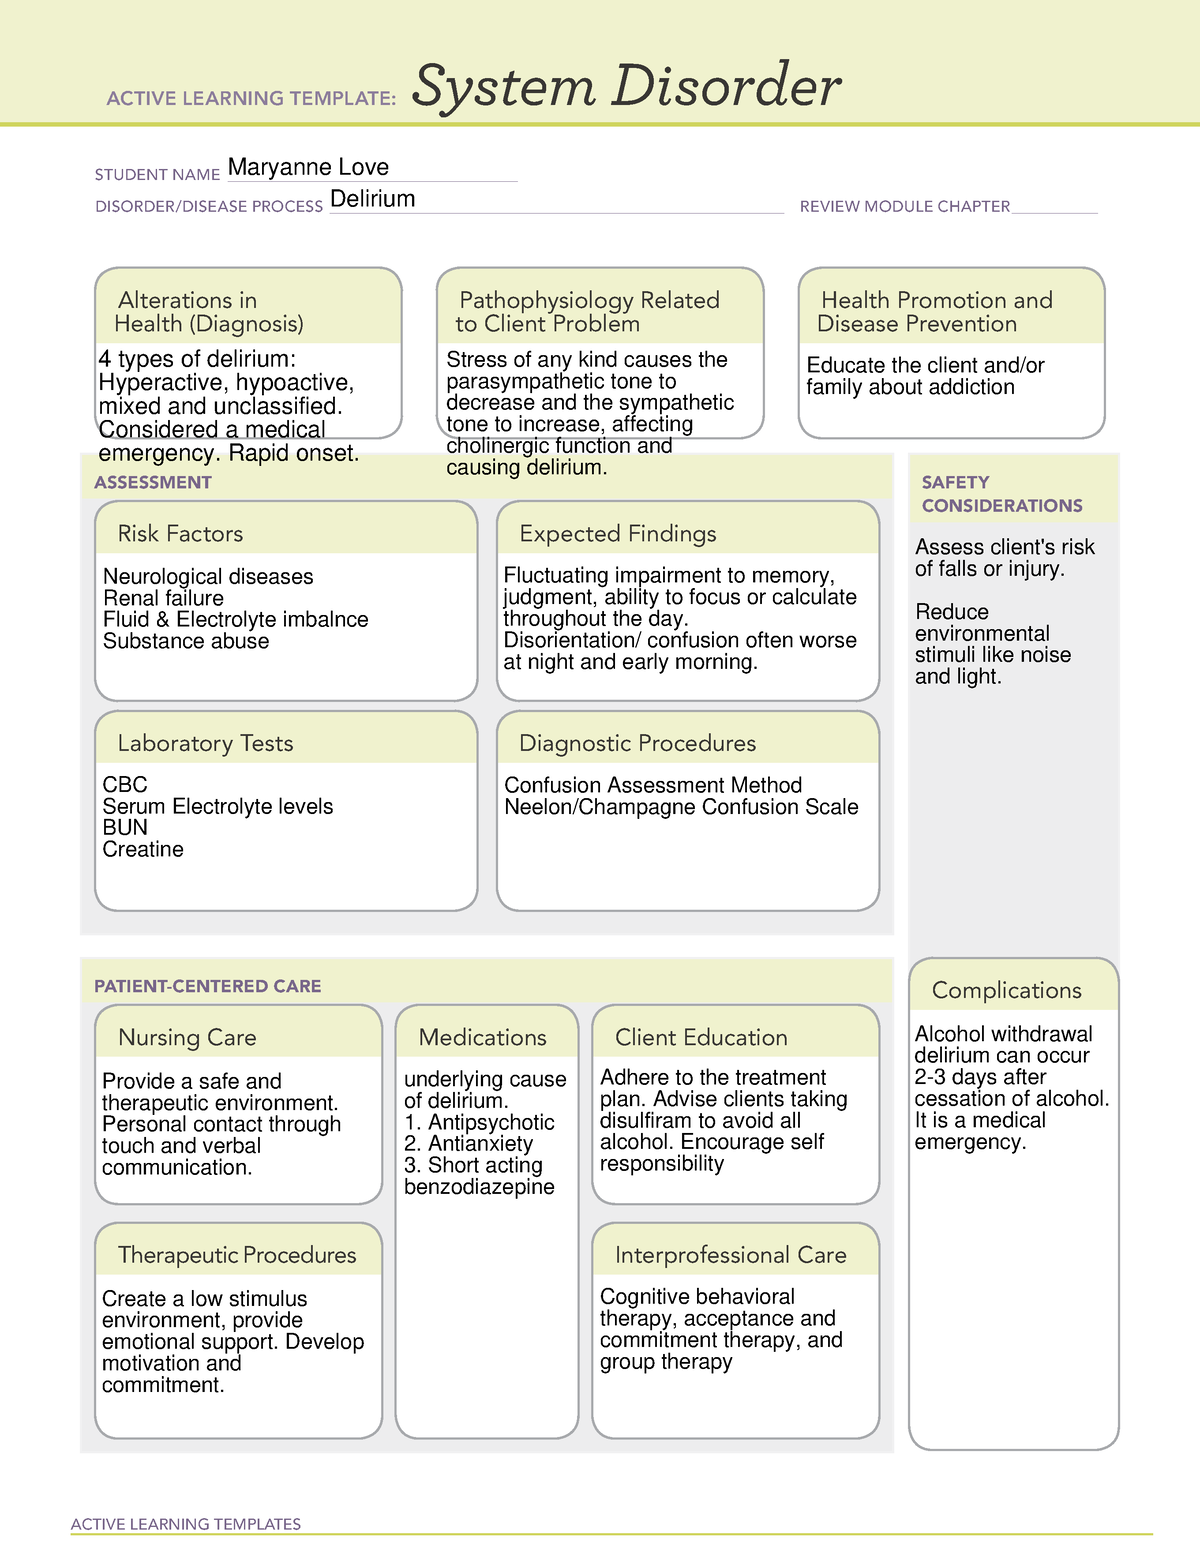 Copy of System Disorder blank - ACTIVE LEARNING TEMPLATES System ...